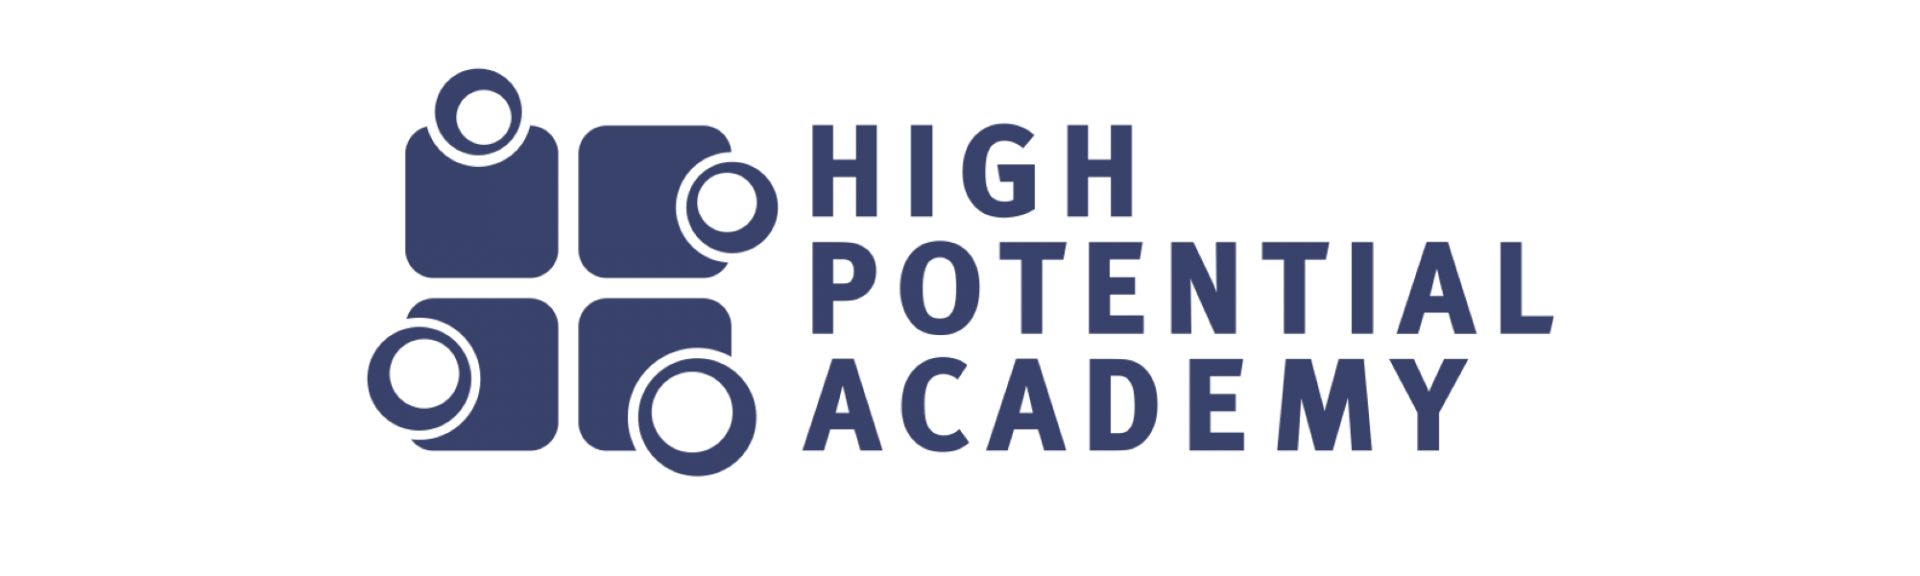 High Potential Academy